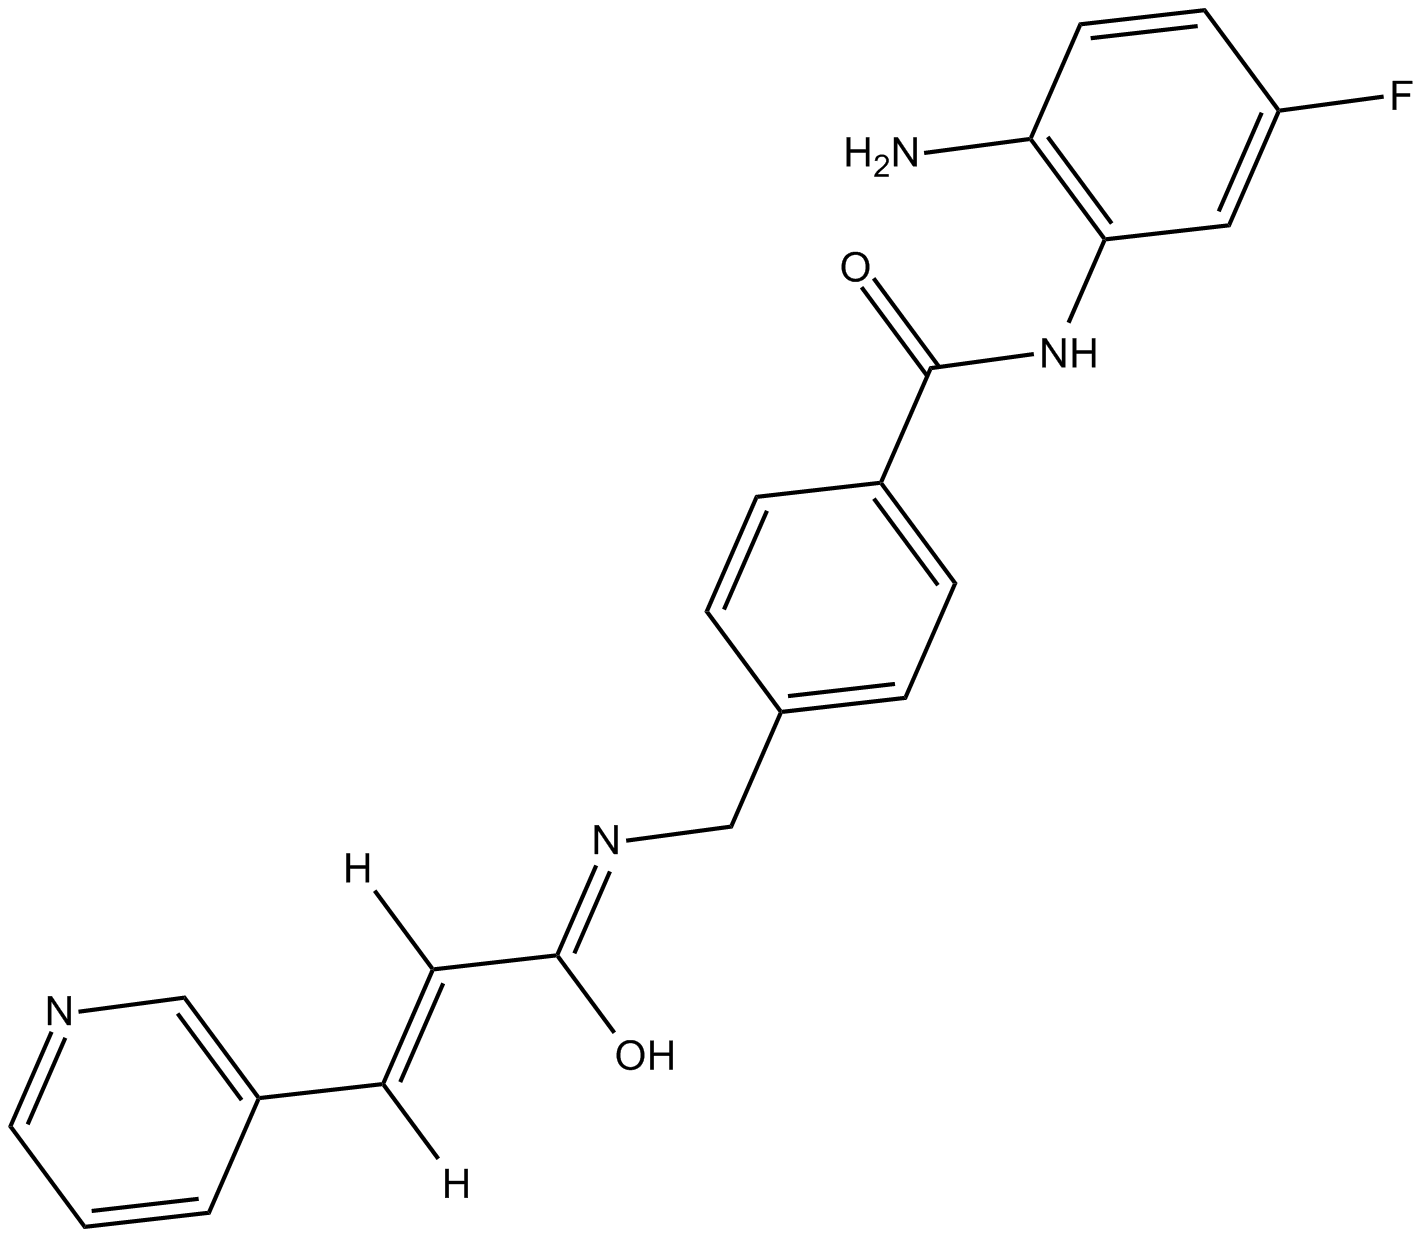 Chidamide  Chemical Structure